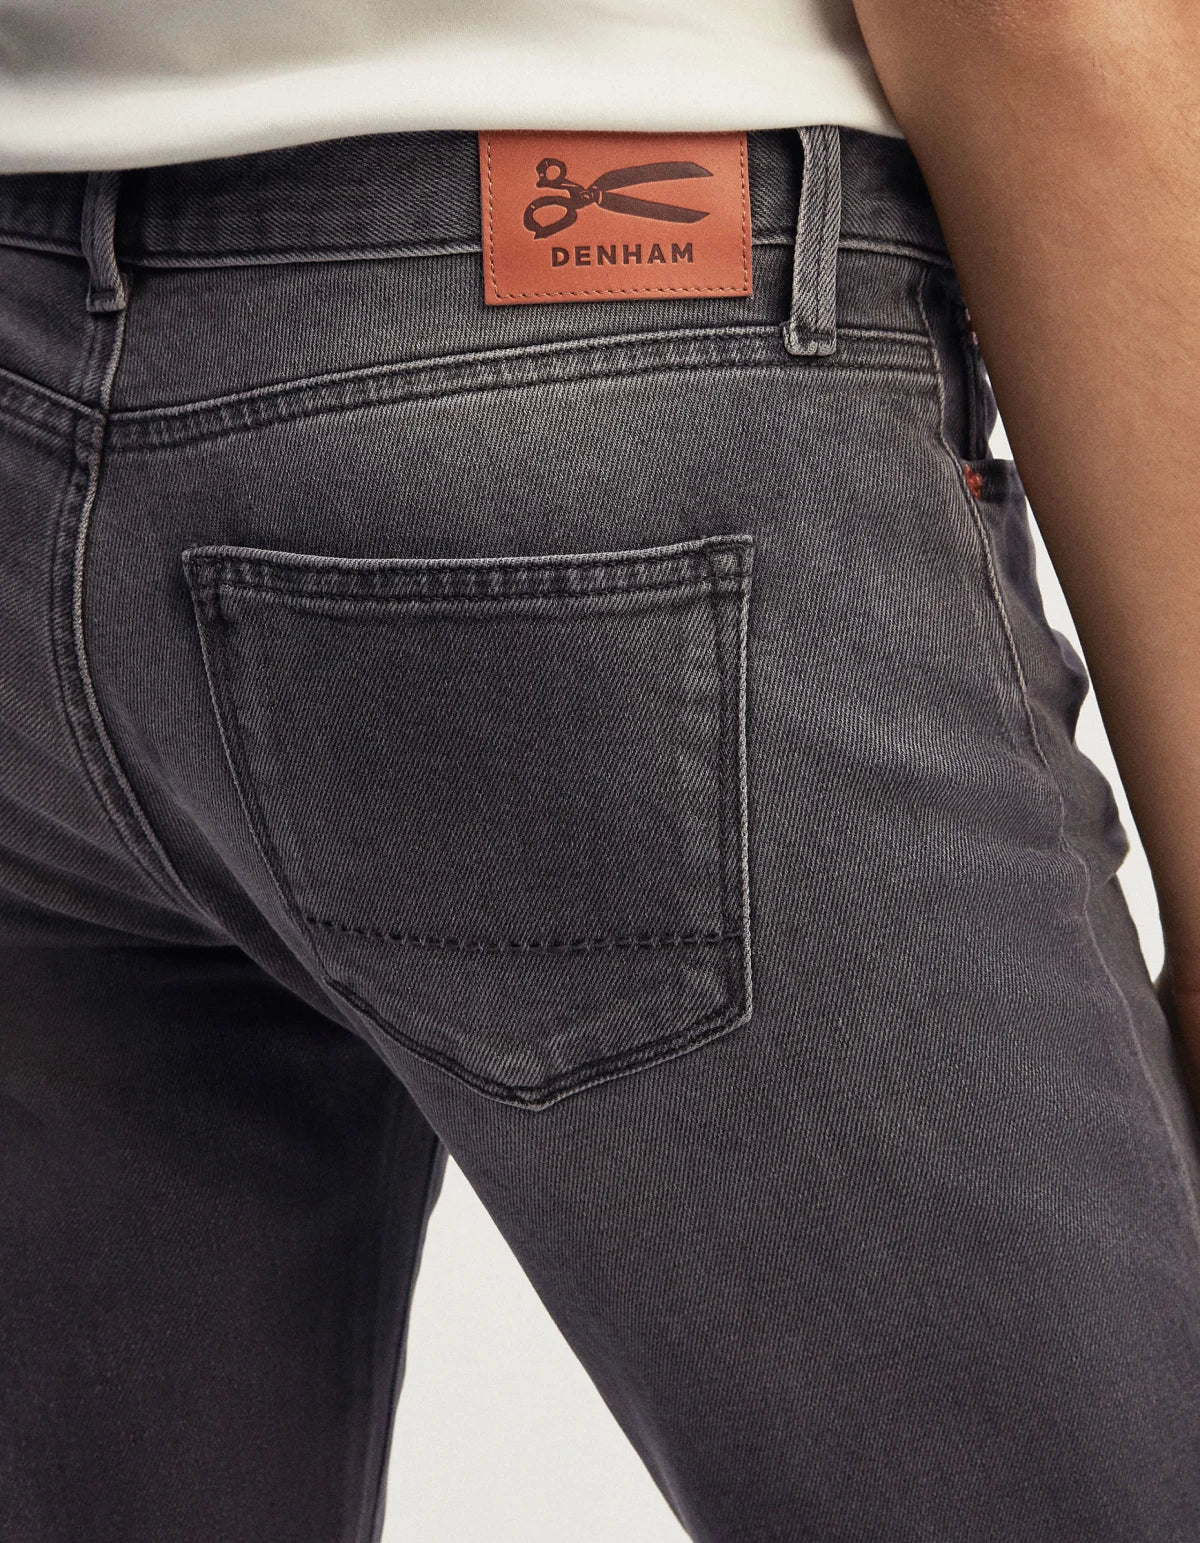 The back of a man's mid-rise cut jeans with an orange label, part of Denham's Authentics range in comfort stretch black denim, featuring the MONROE - Authentic Grey Wash.